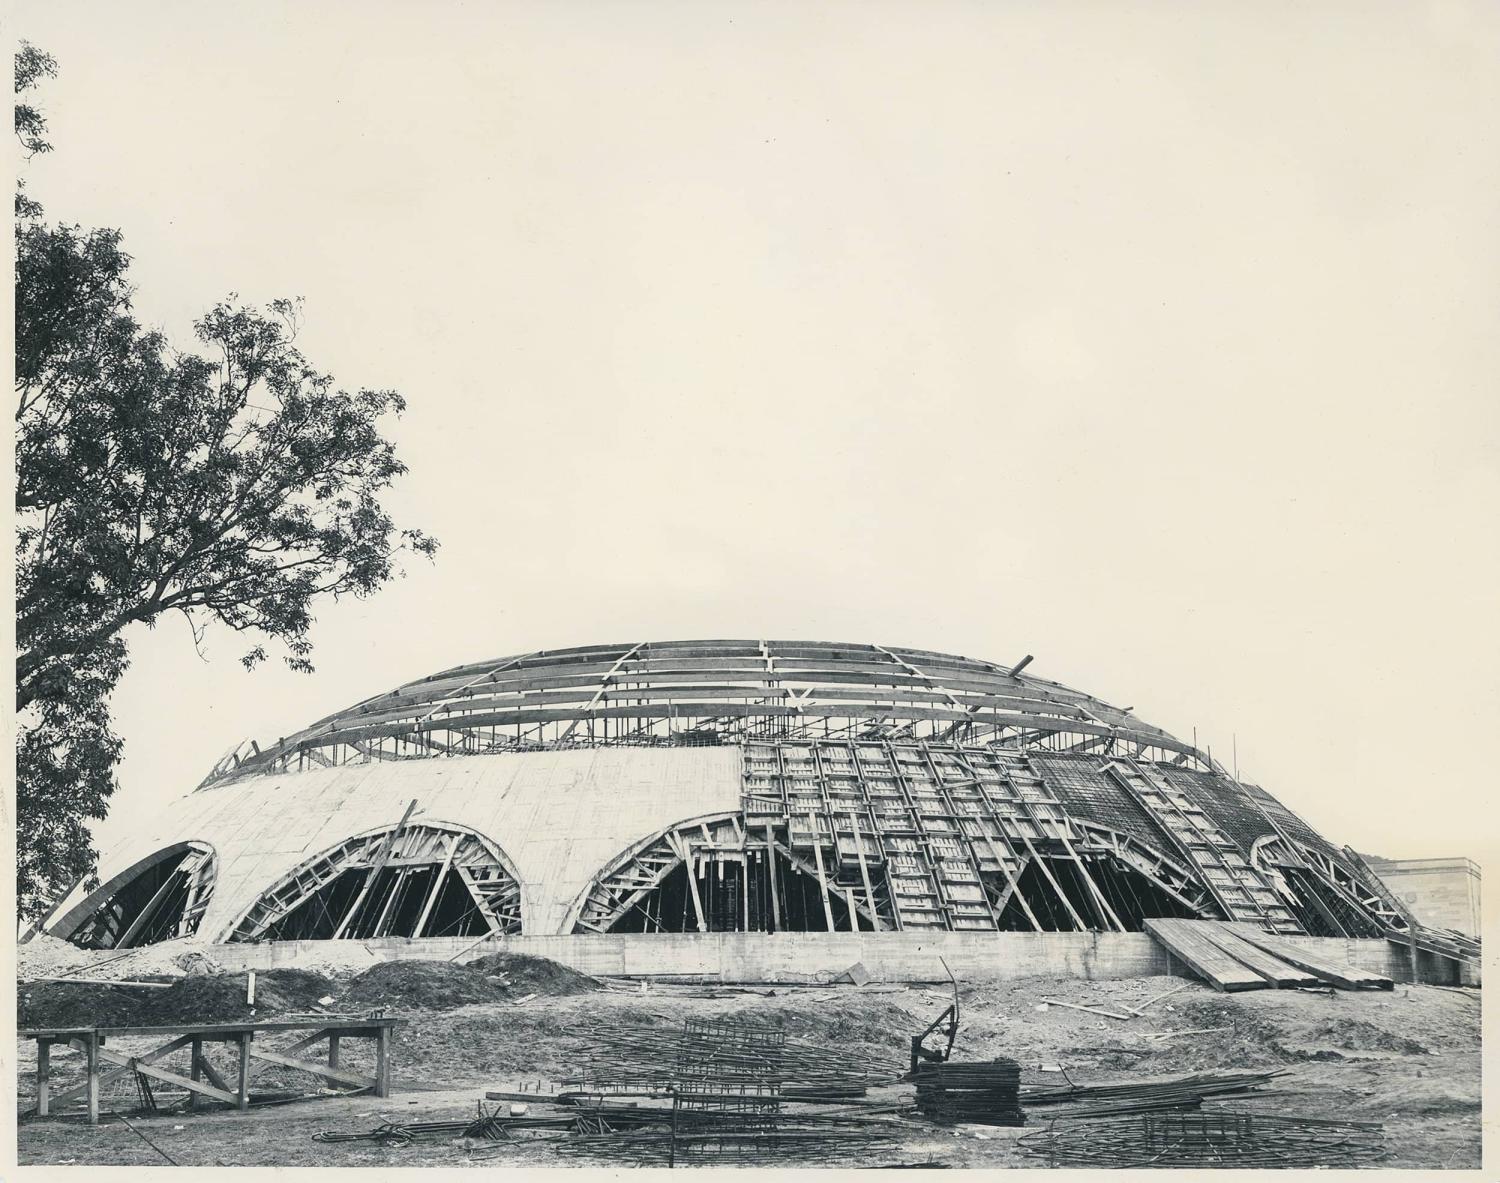 The Shine Dome construction